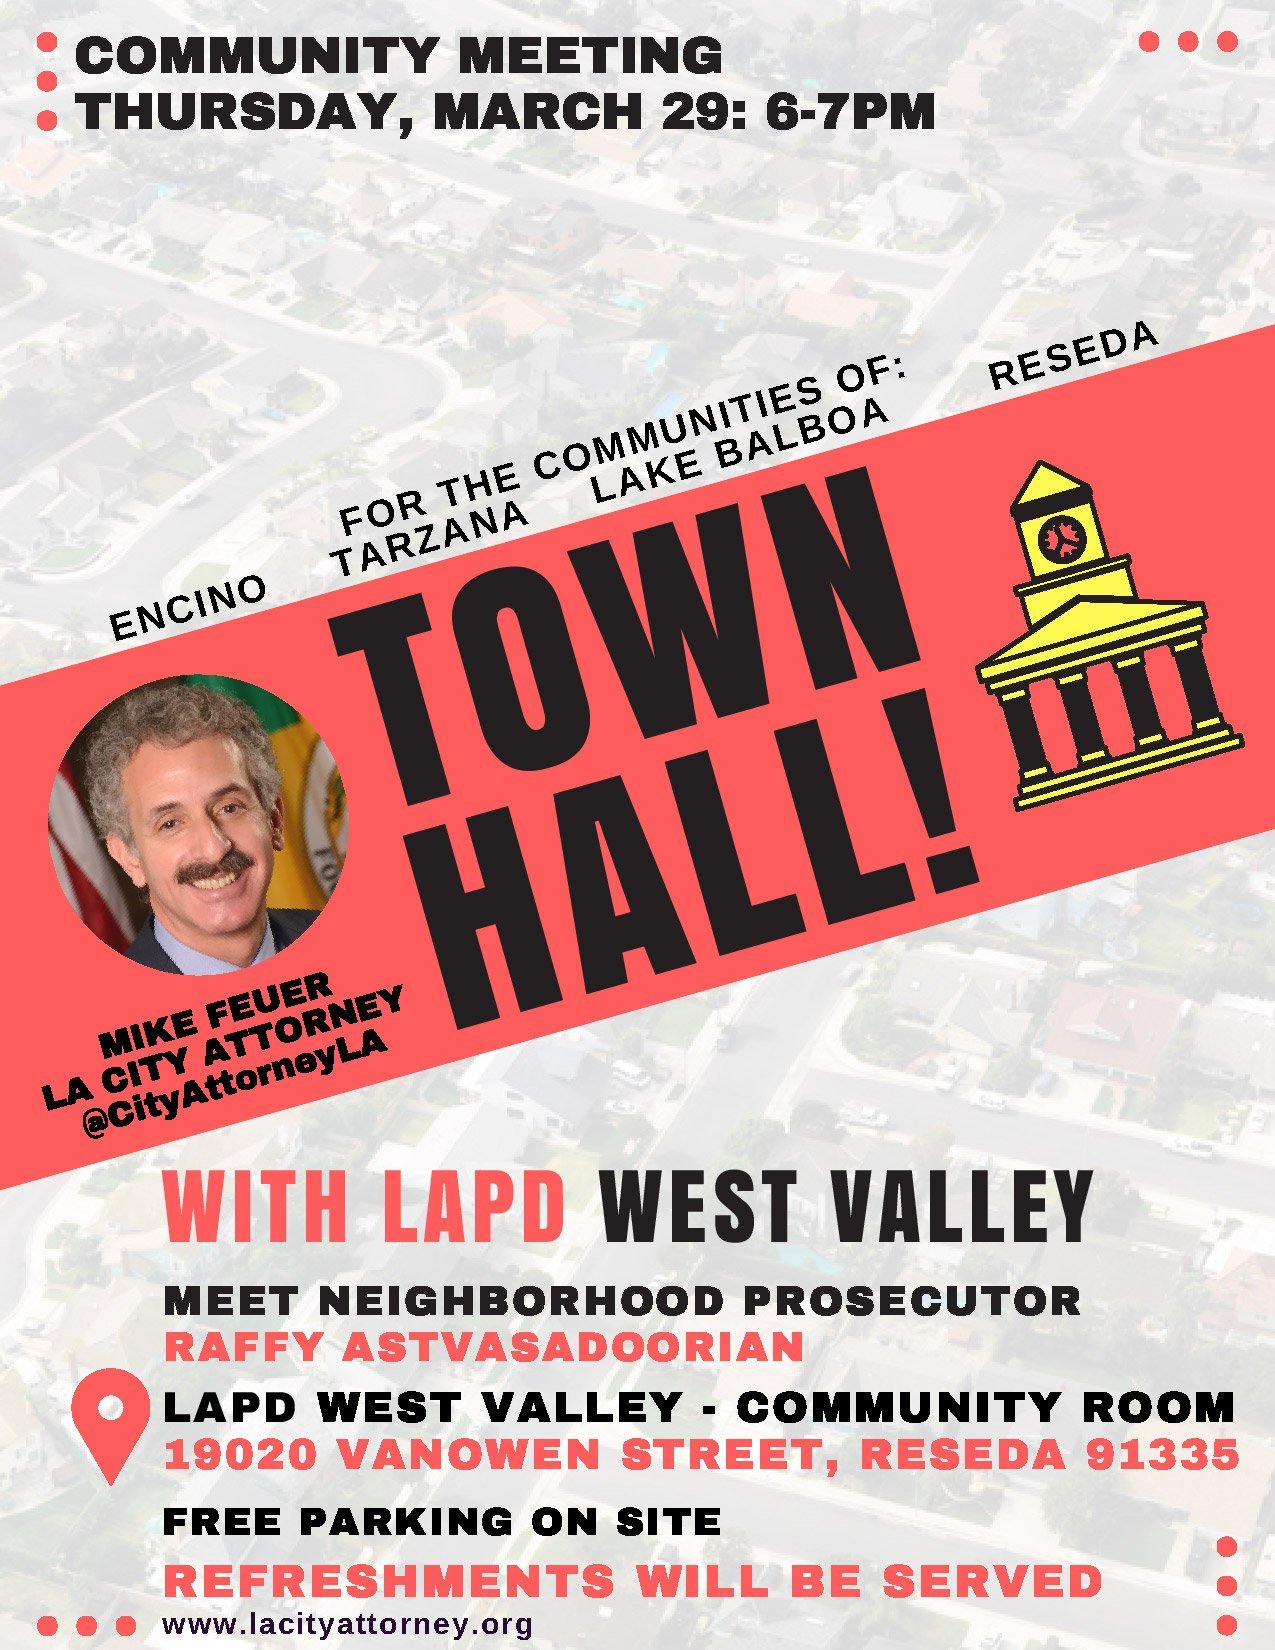 LAPD-WEST-VALLEY-TOWN-HALL-2018-ENGLISH-3.29